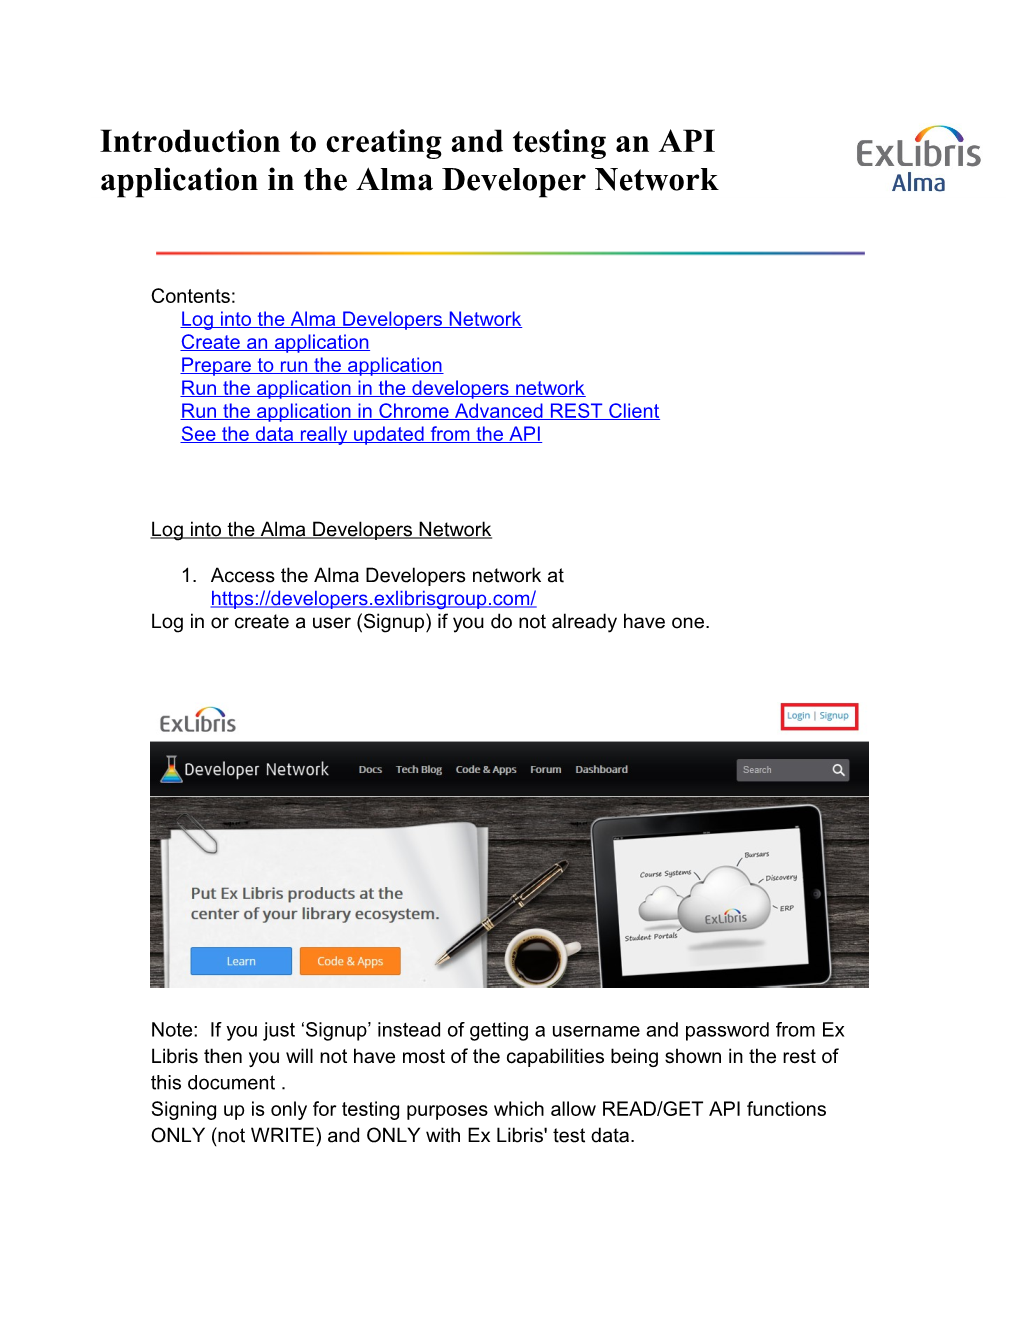 Log Into the Alma Developers Network